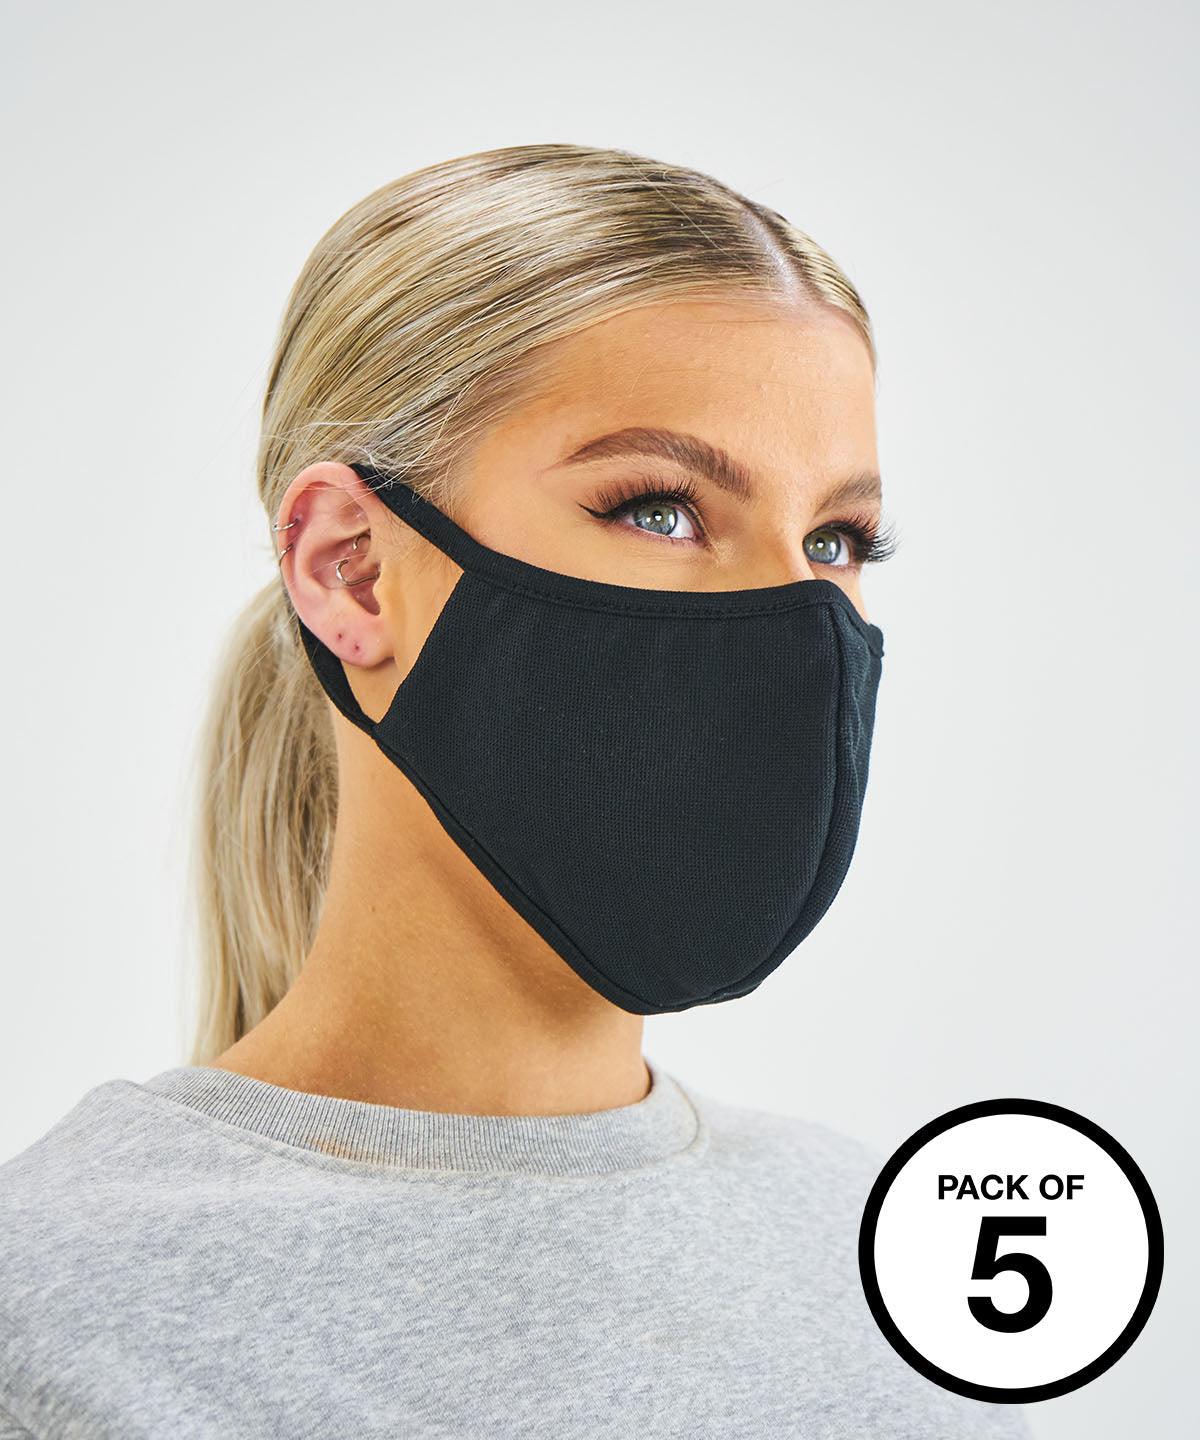 Natural - Antimicrobial washable face mask (Pack of 5) Masks AXQ Face Covers, Personal Protection, Selected Protectivewear Schoolwear Centres